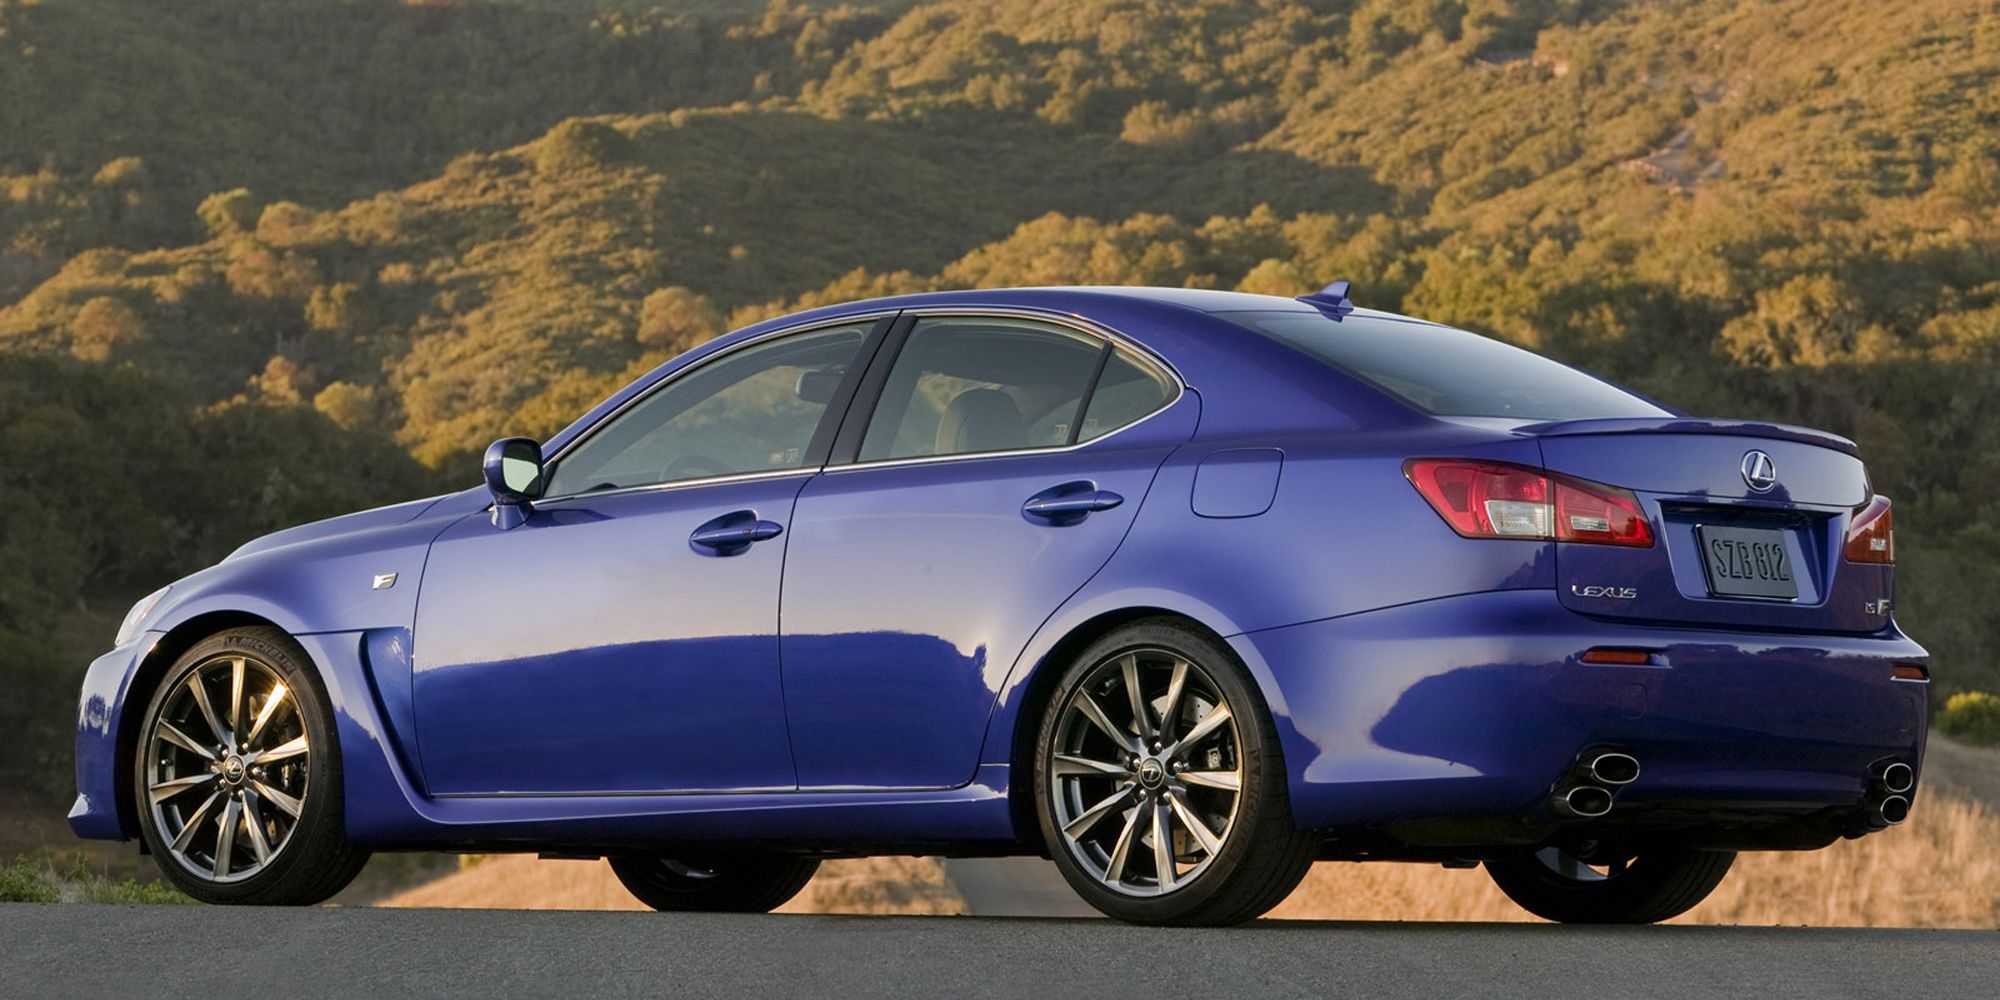 Rear 3/4 view of the Lexus IS F